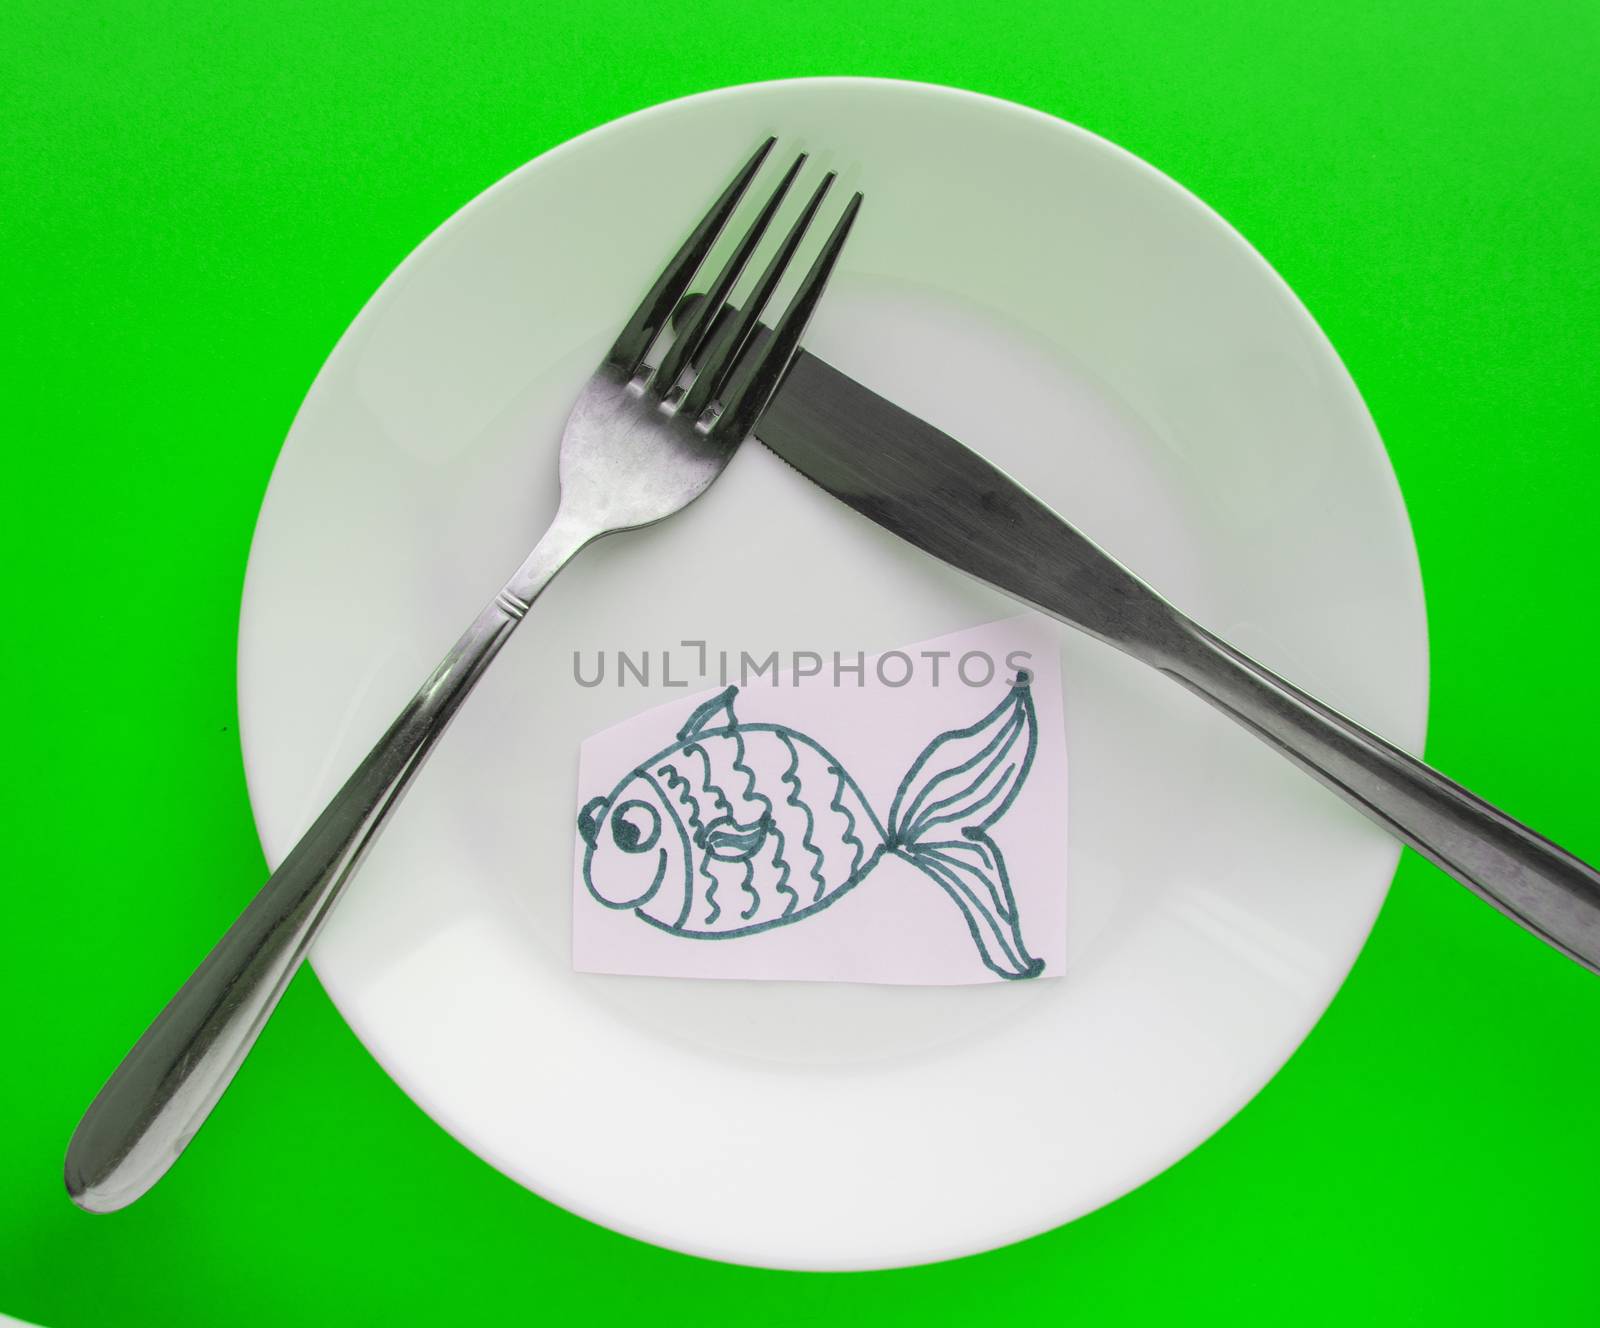 The celebration of April fool's Day, a Plate with a fork and knife and a paper fish on a green background. Humor by claire_lucia